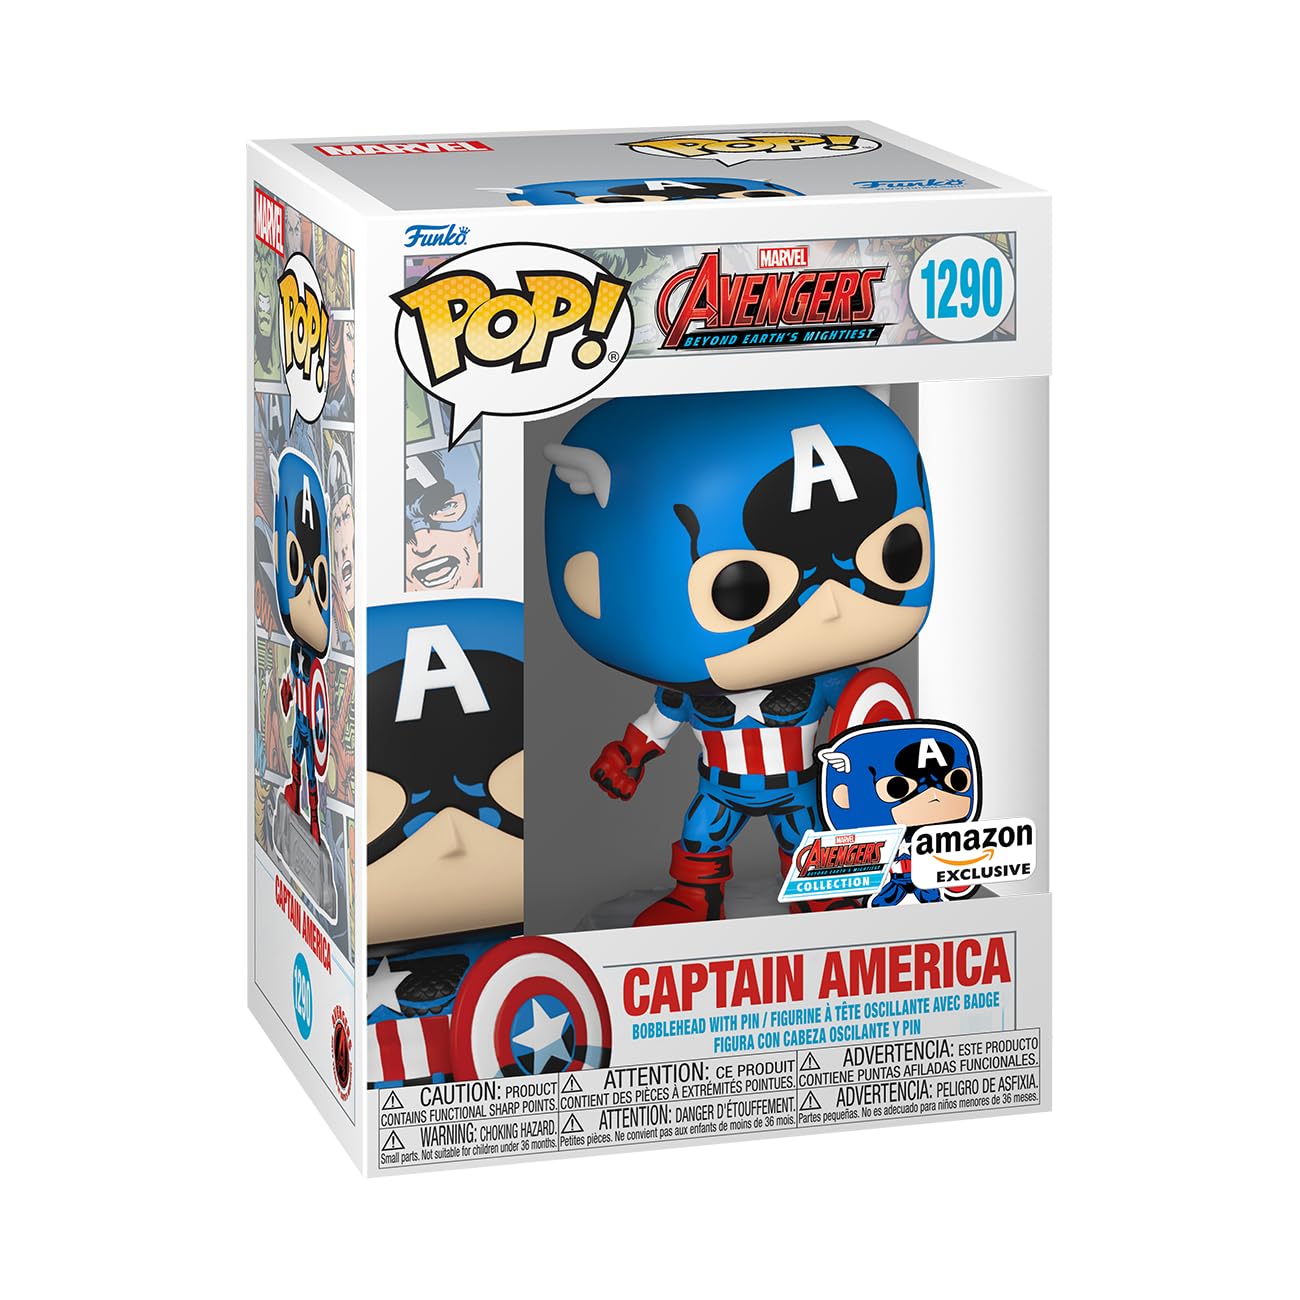 Funko Pop! & Pin: The Avengers: Earth's Mightiest Heroes - 60th Anniversary, Captain America with Pin, Amazon Exclusive